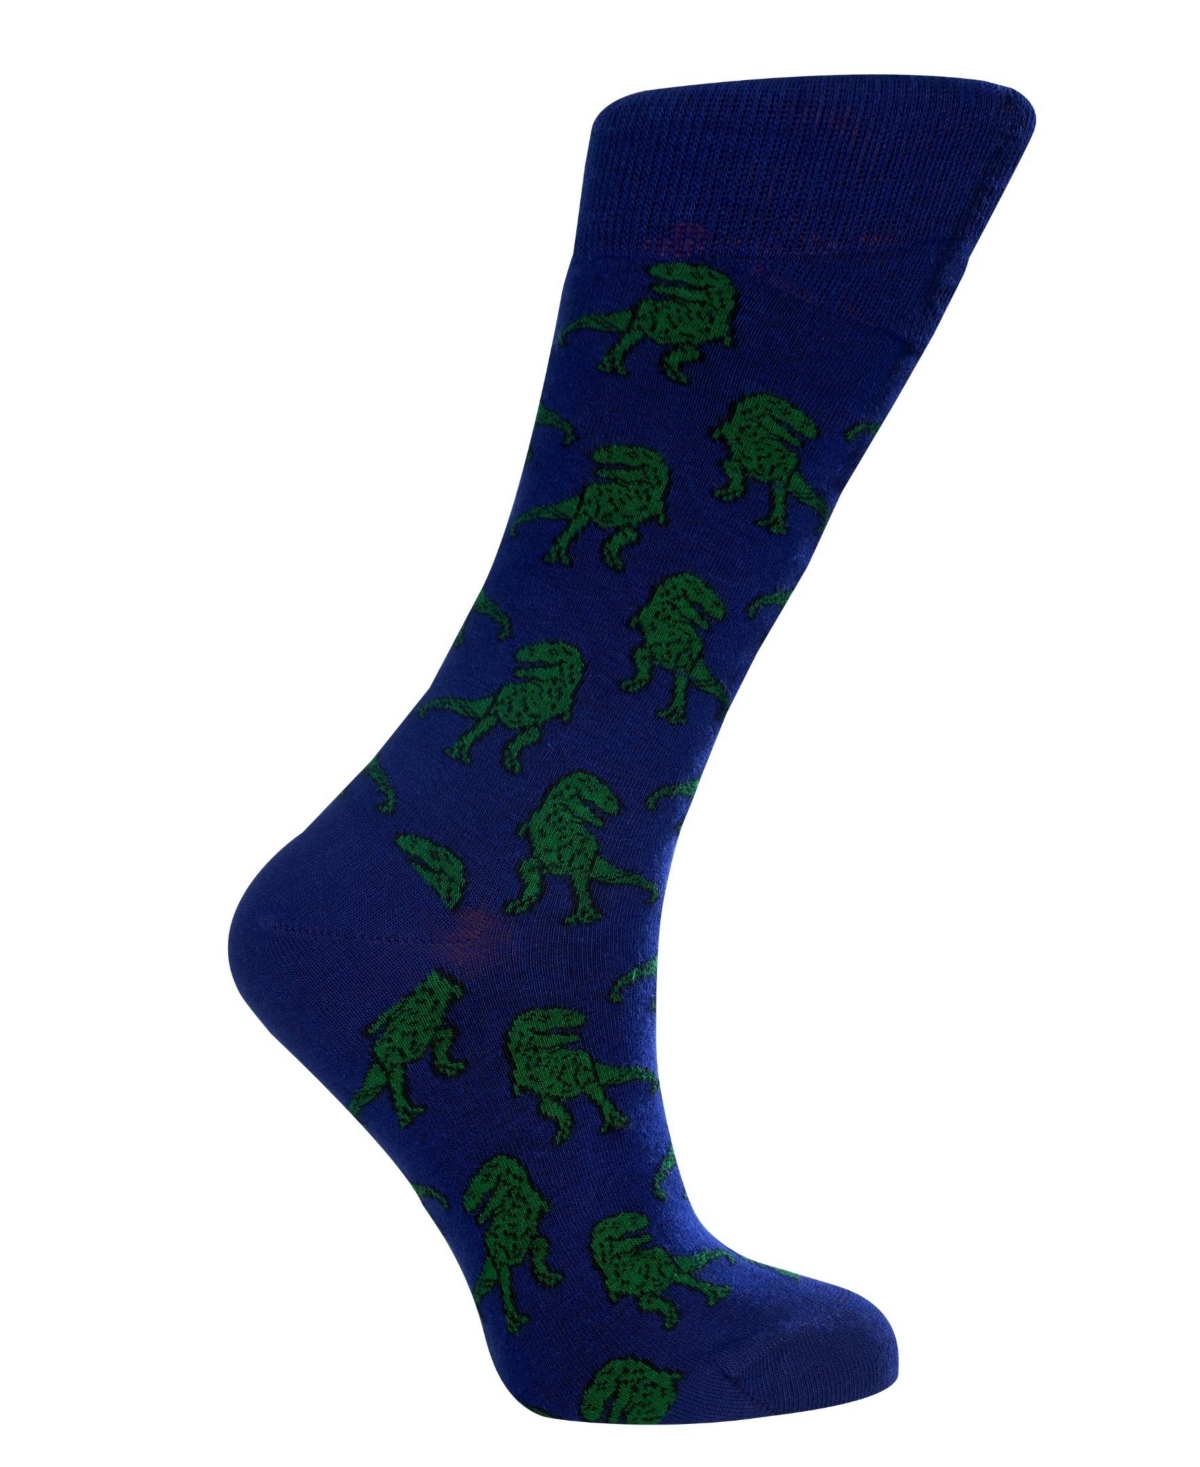 Women's T-Rex W-Cotton Novelty Crew Socks with Seamless Toe Design, Pack of 1 - Navy